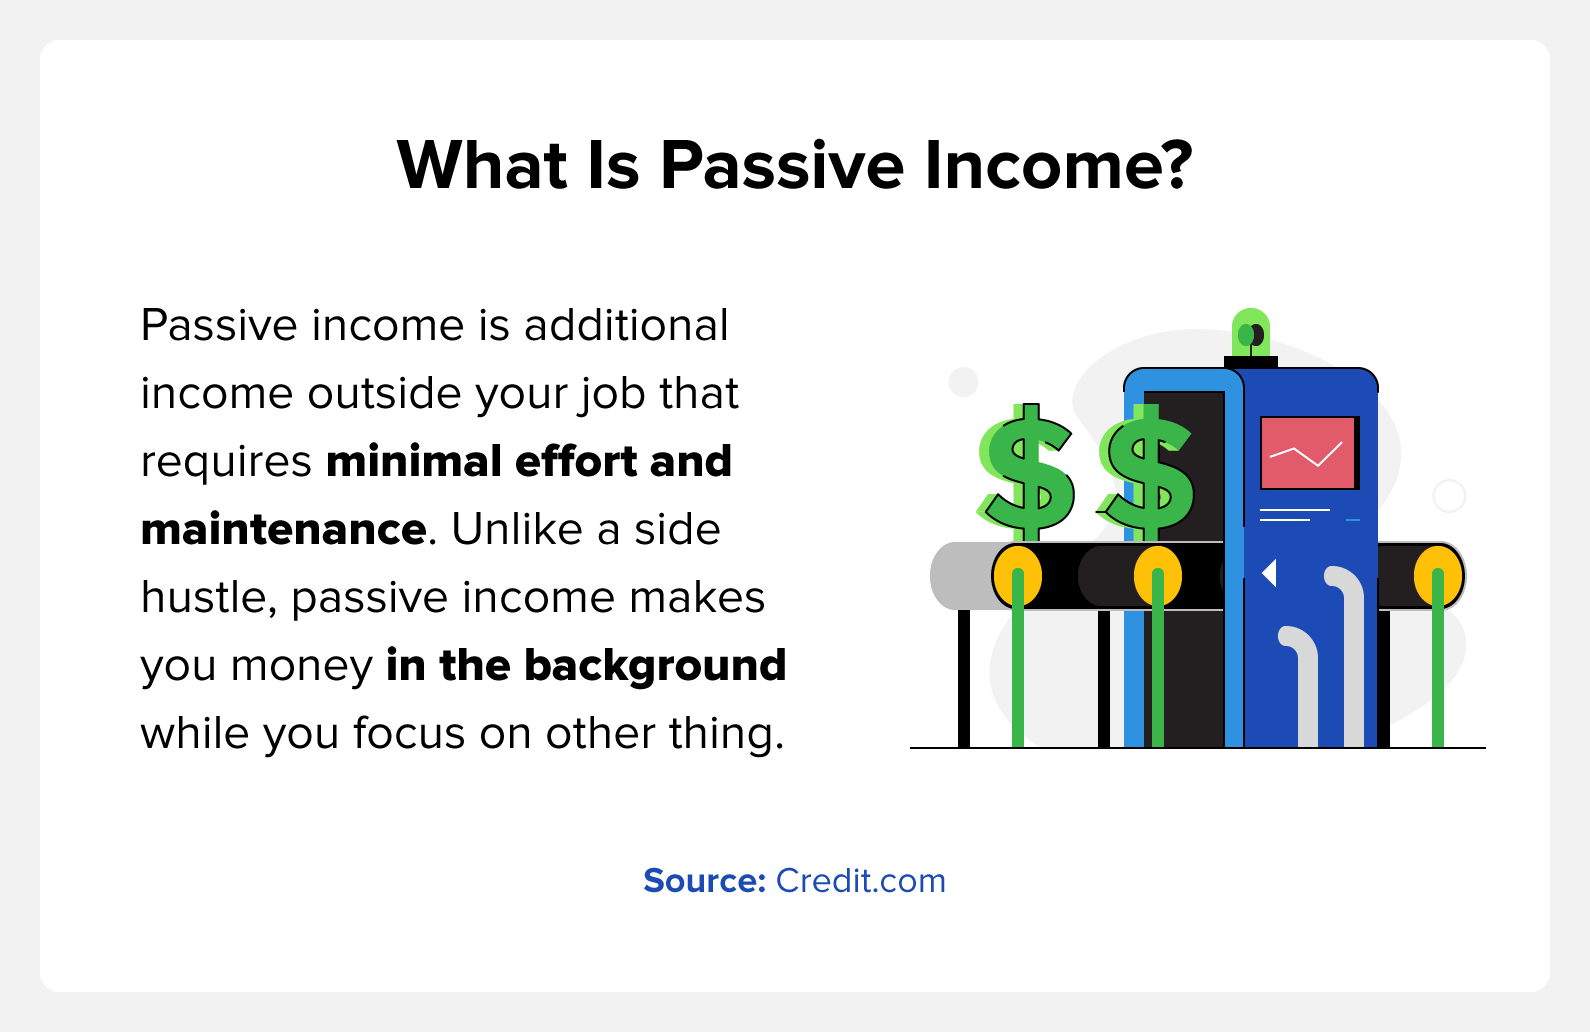 What is passive income? Passive invome is additional income outside your job that requires minimal effort and maintenance. Unlike a side hustle, passive income makes you money in the background while you focus on other thing. 